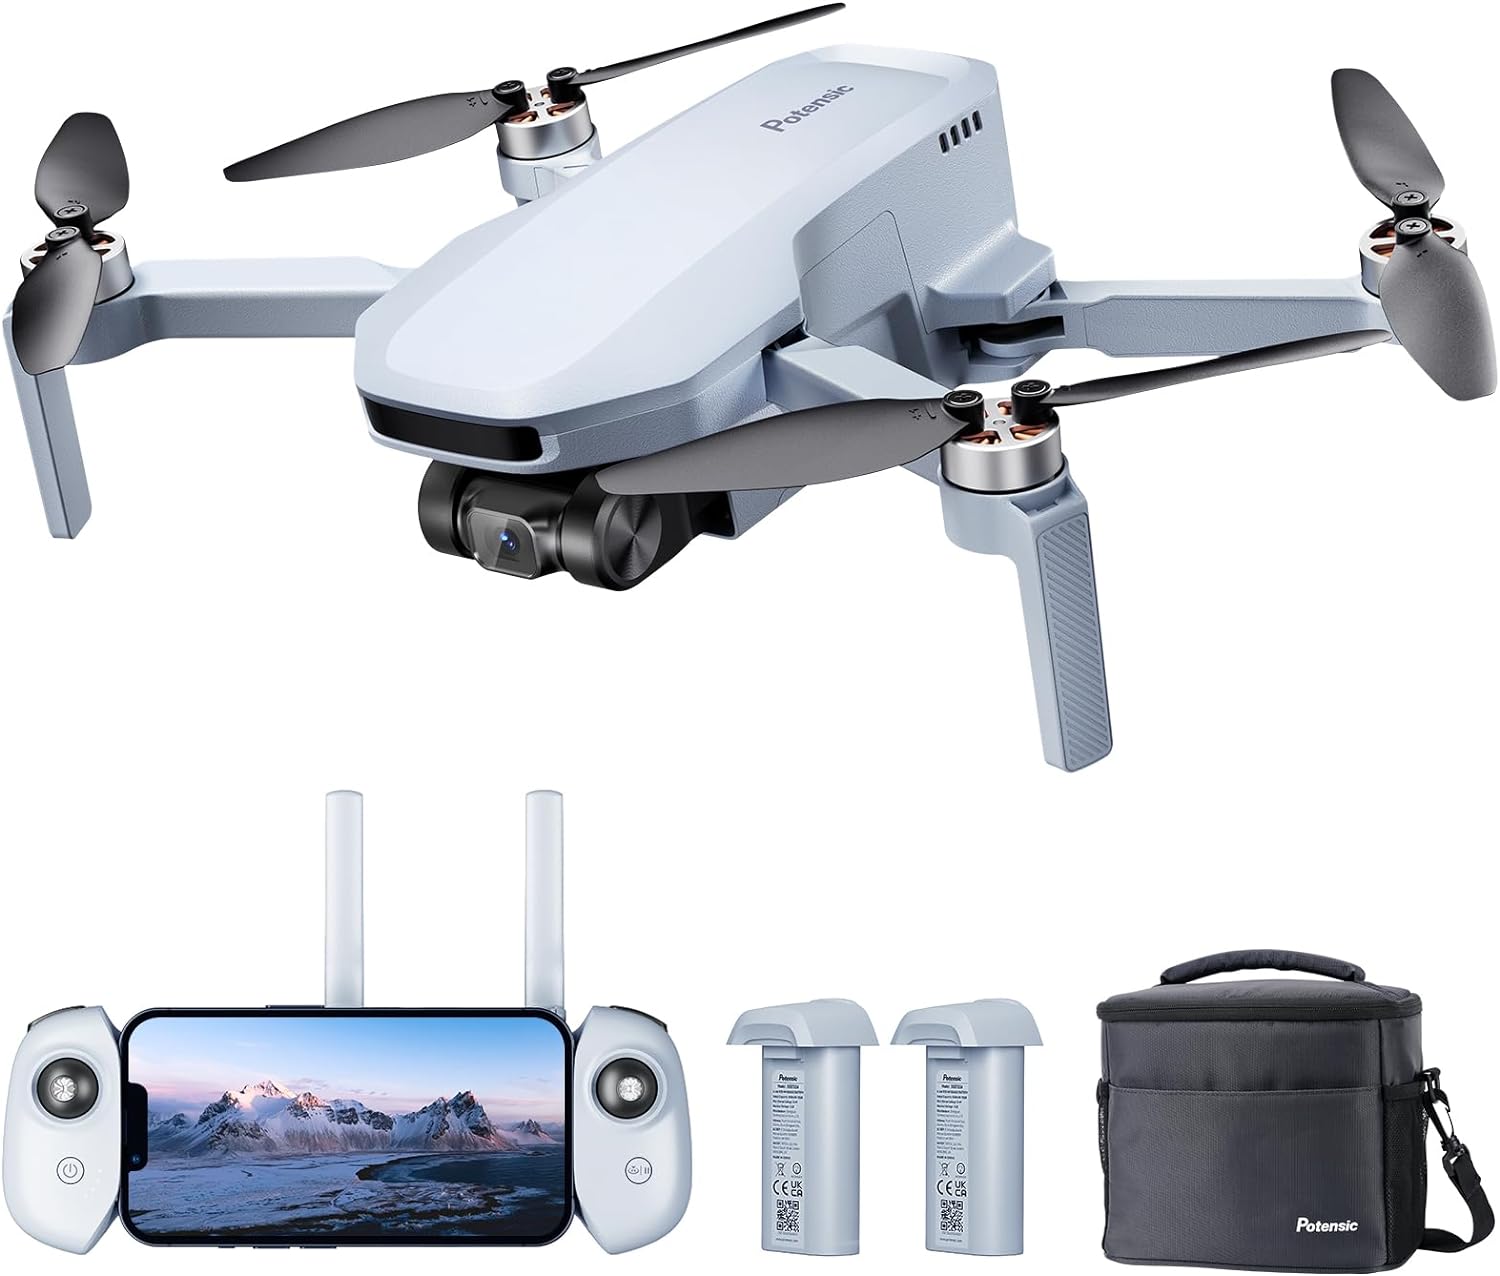 Review of Potensic ATOM SE GPS Drone with 4K EIS Camera